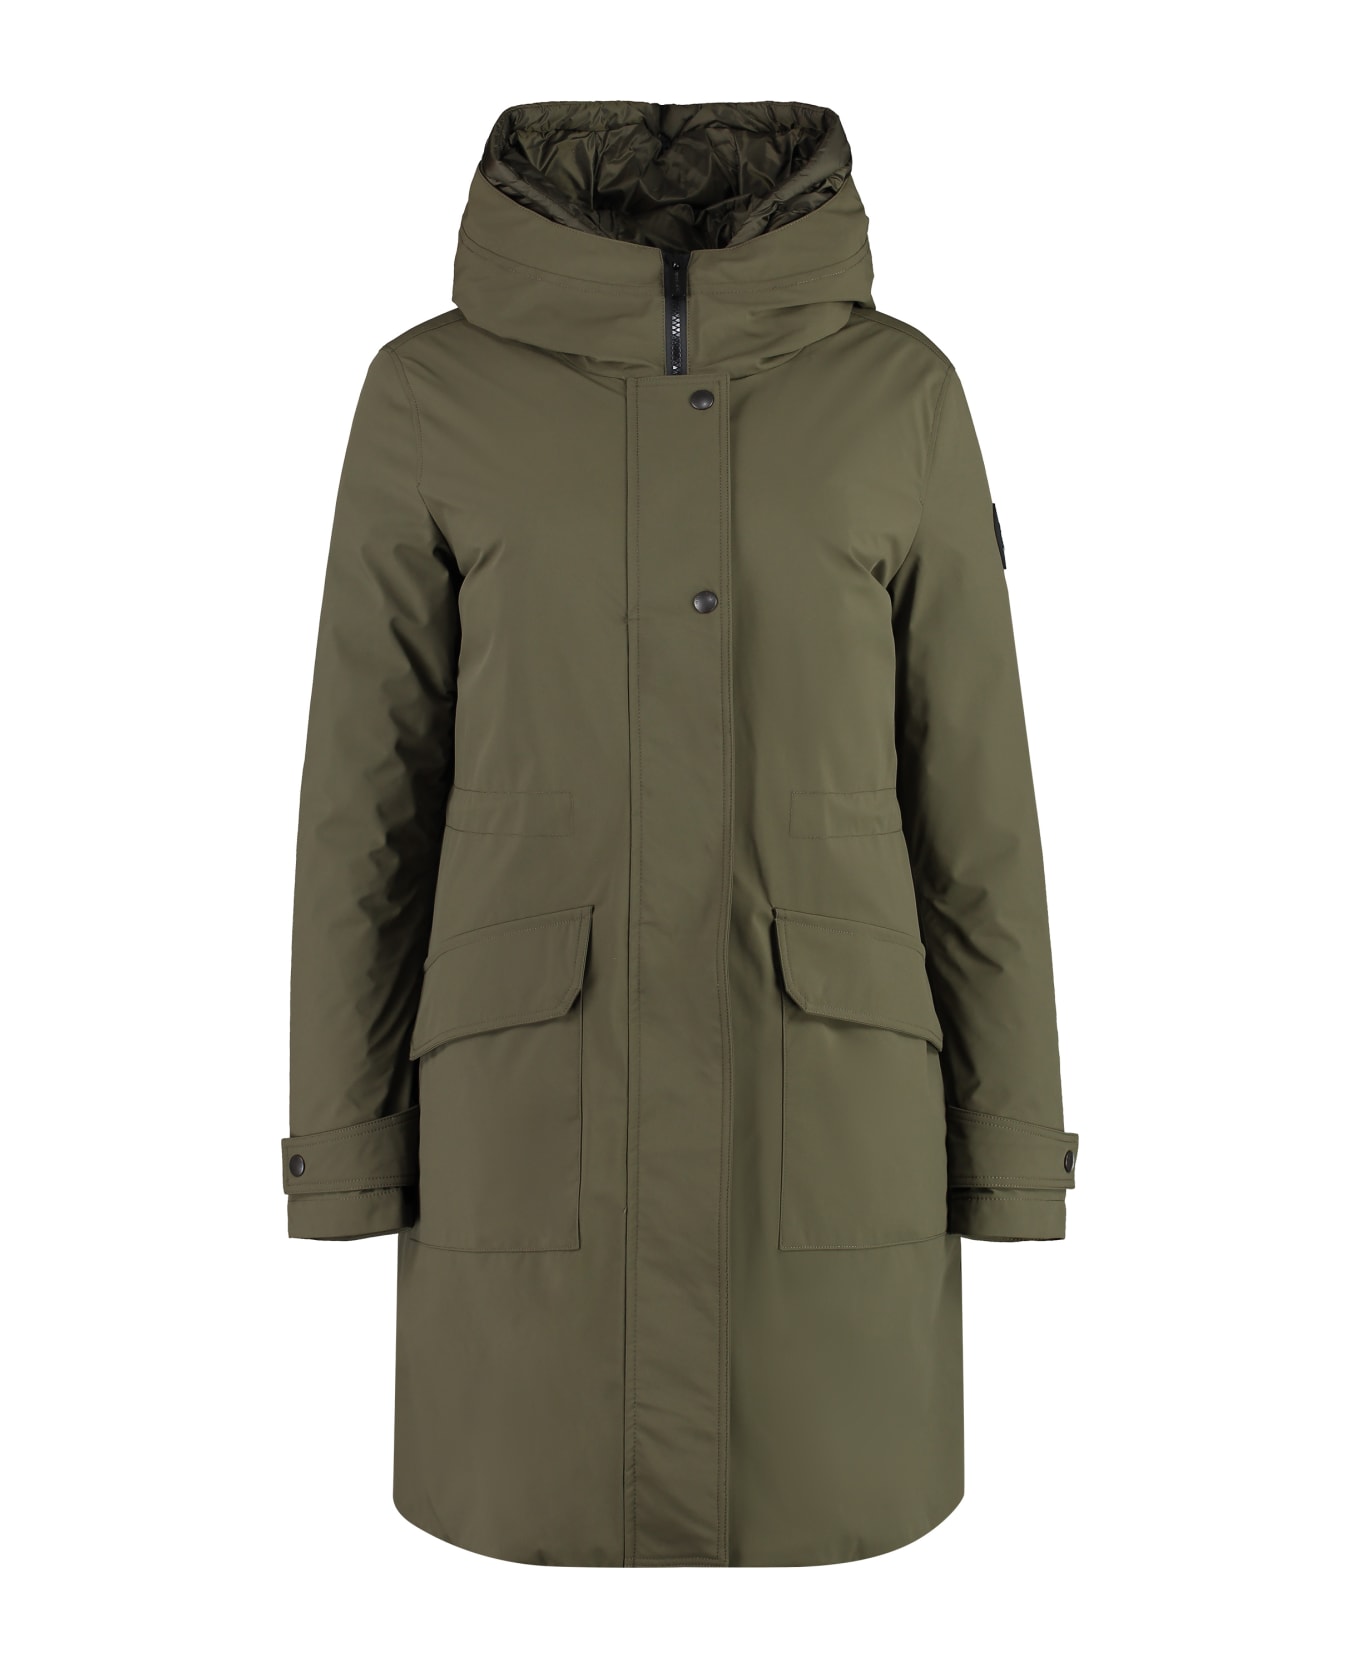 Woolrich Military Technical Fabric Parka With Internal Removable Down Jacket - green